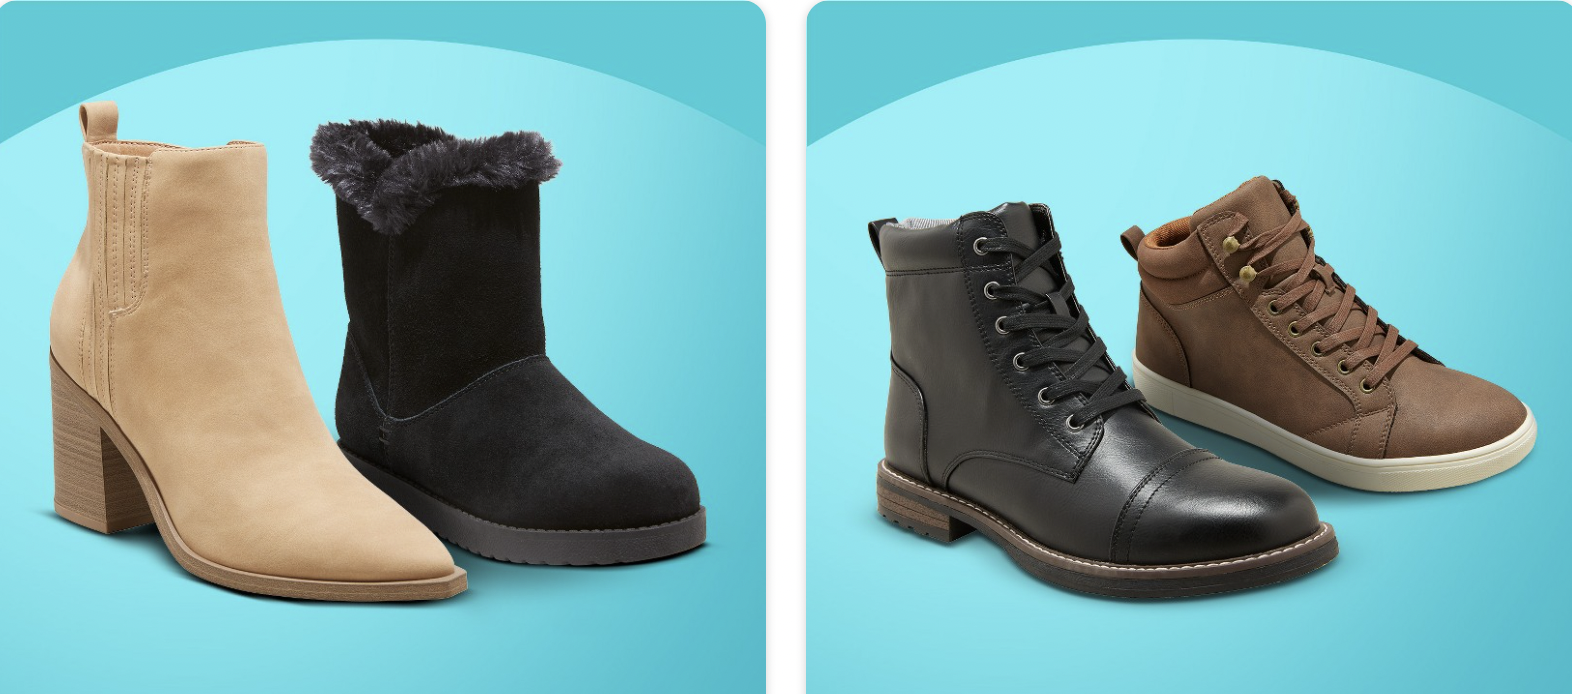 Target Black Friday 2021 Doorbuster Deal |  50% off Boots for the Whole Family